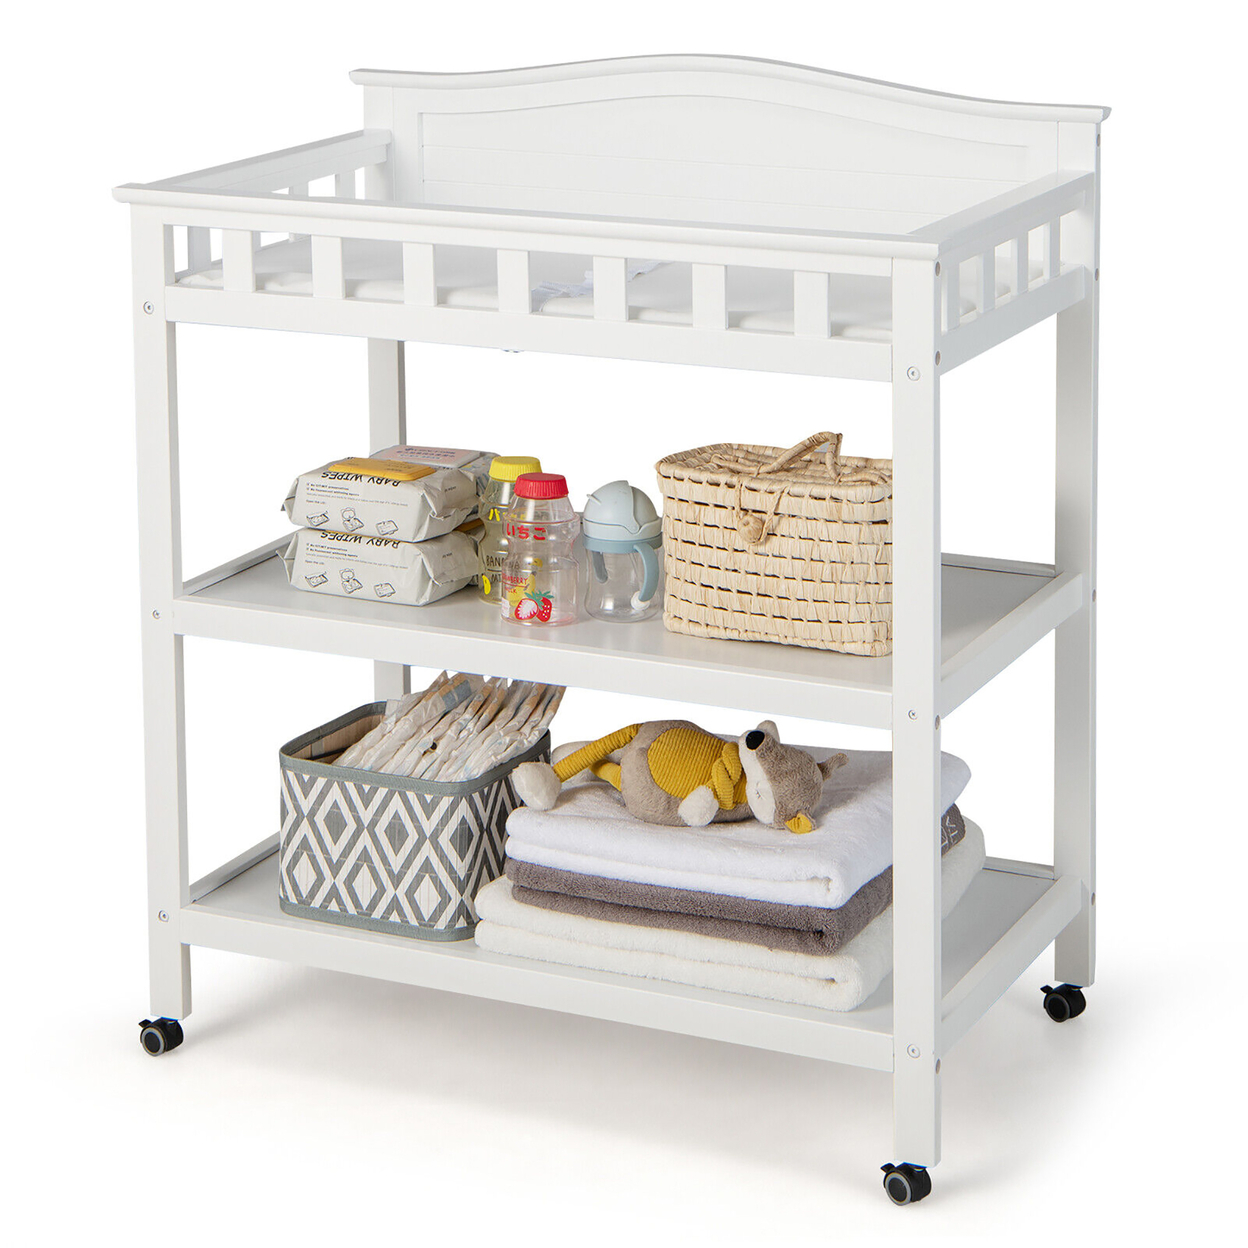 Mobile Baby Changing Table Infant Diaper Station Nursery Organizer W/ Pad